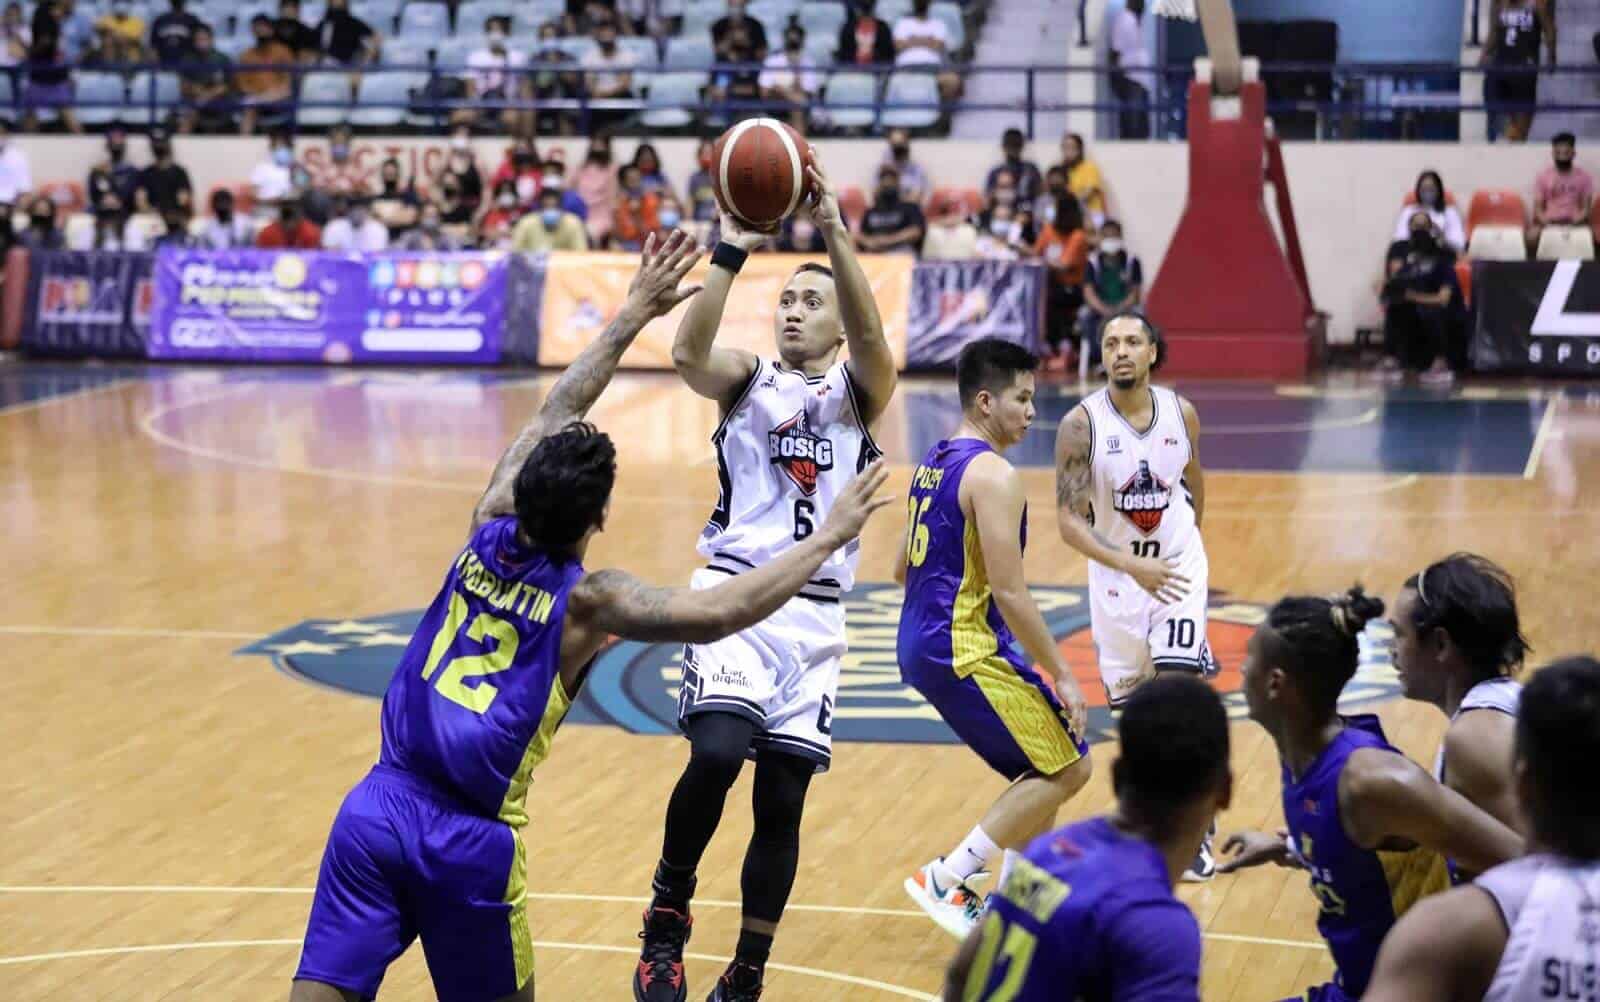 A basketball player is attempting to block a shot during a game in the PBA Philippine Cup campaign.